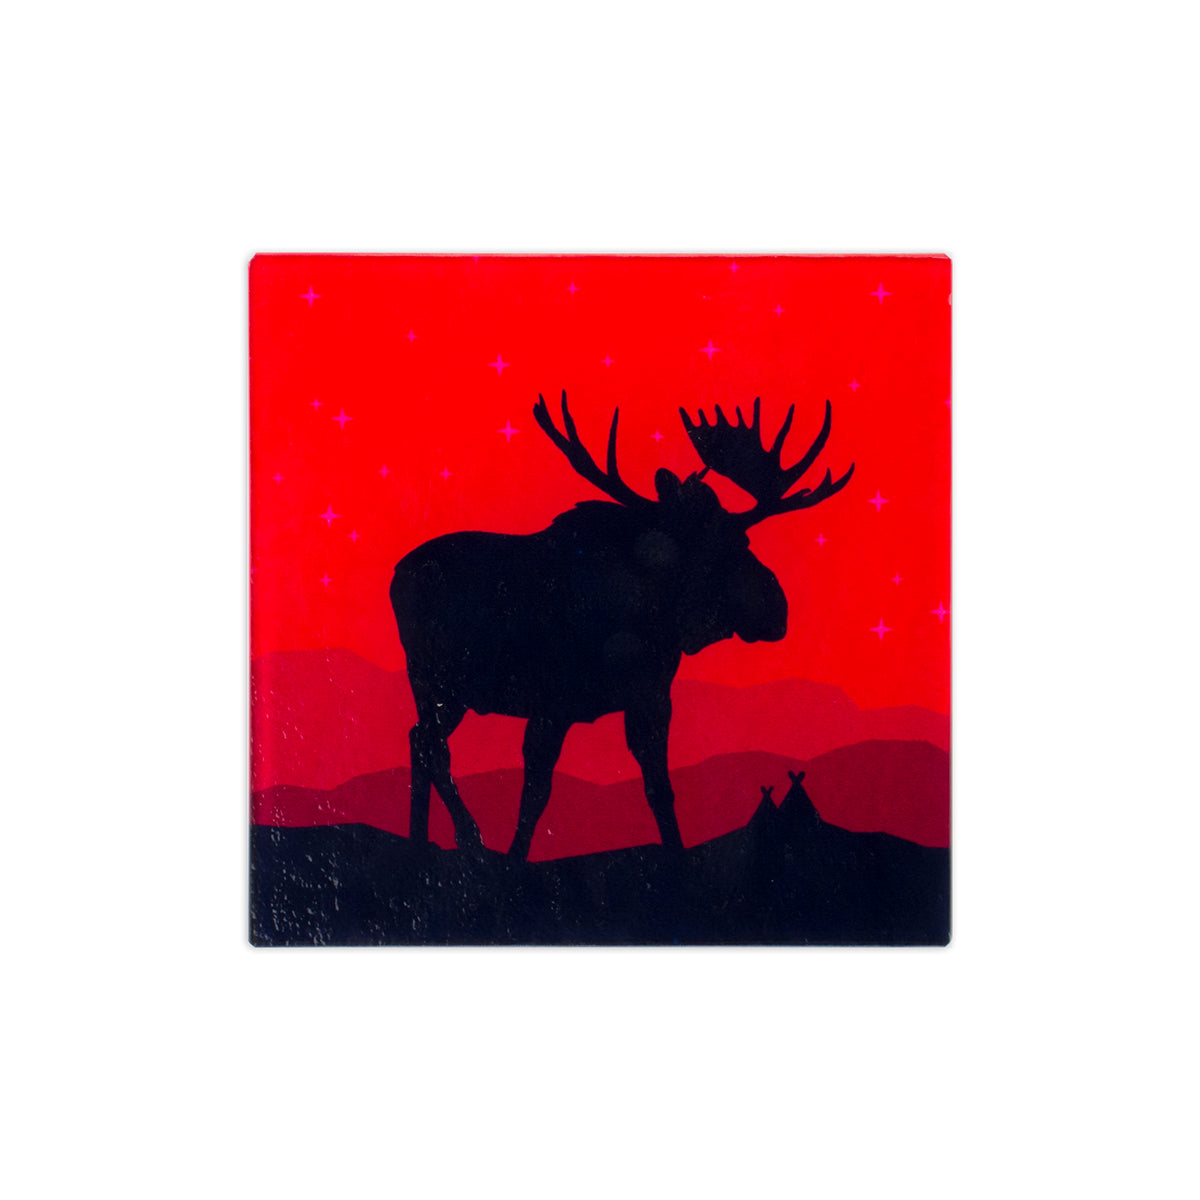 6" x 6" heat resistant tempered glass trivet featuring a red background and moose silhouette in black